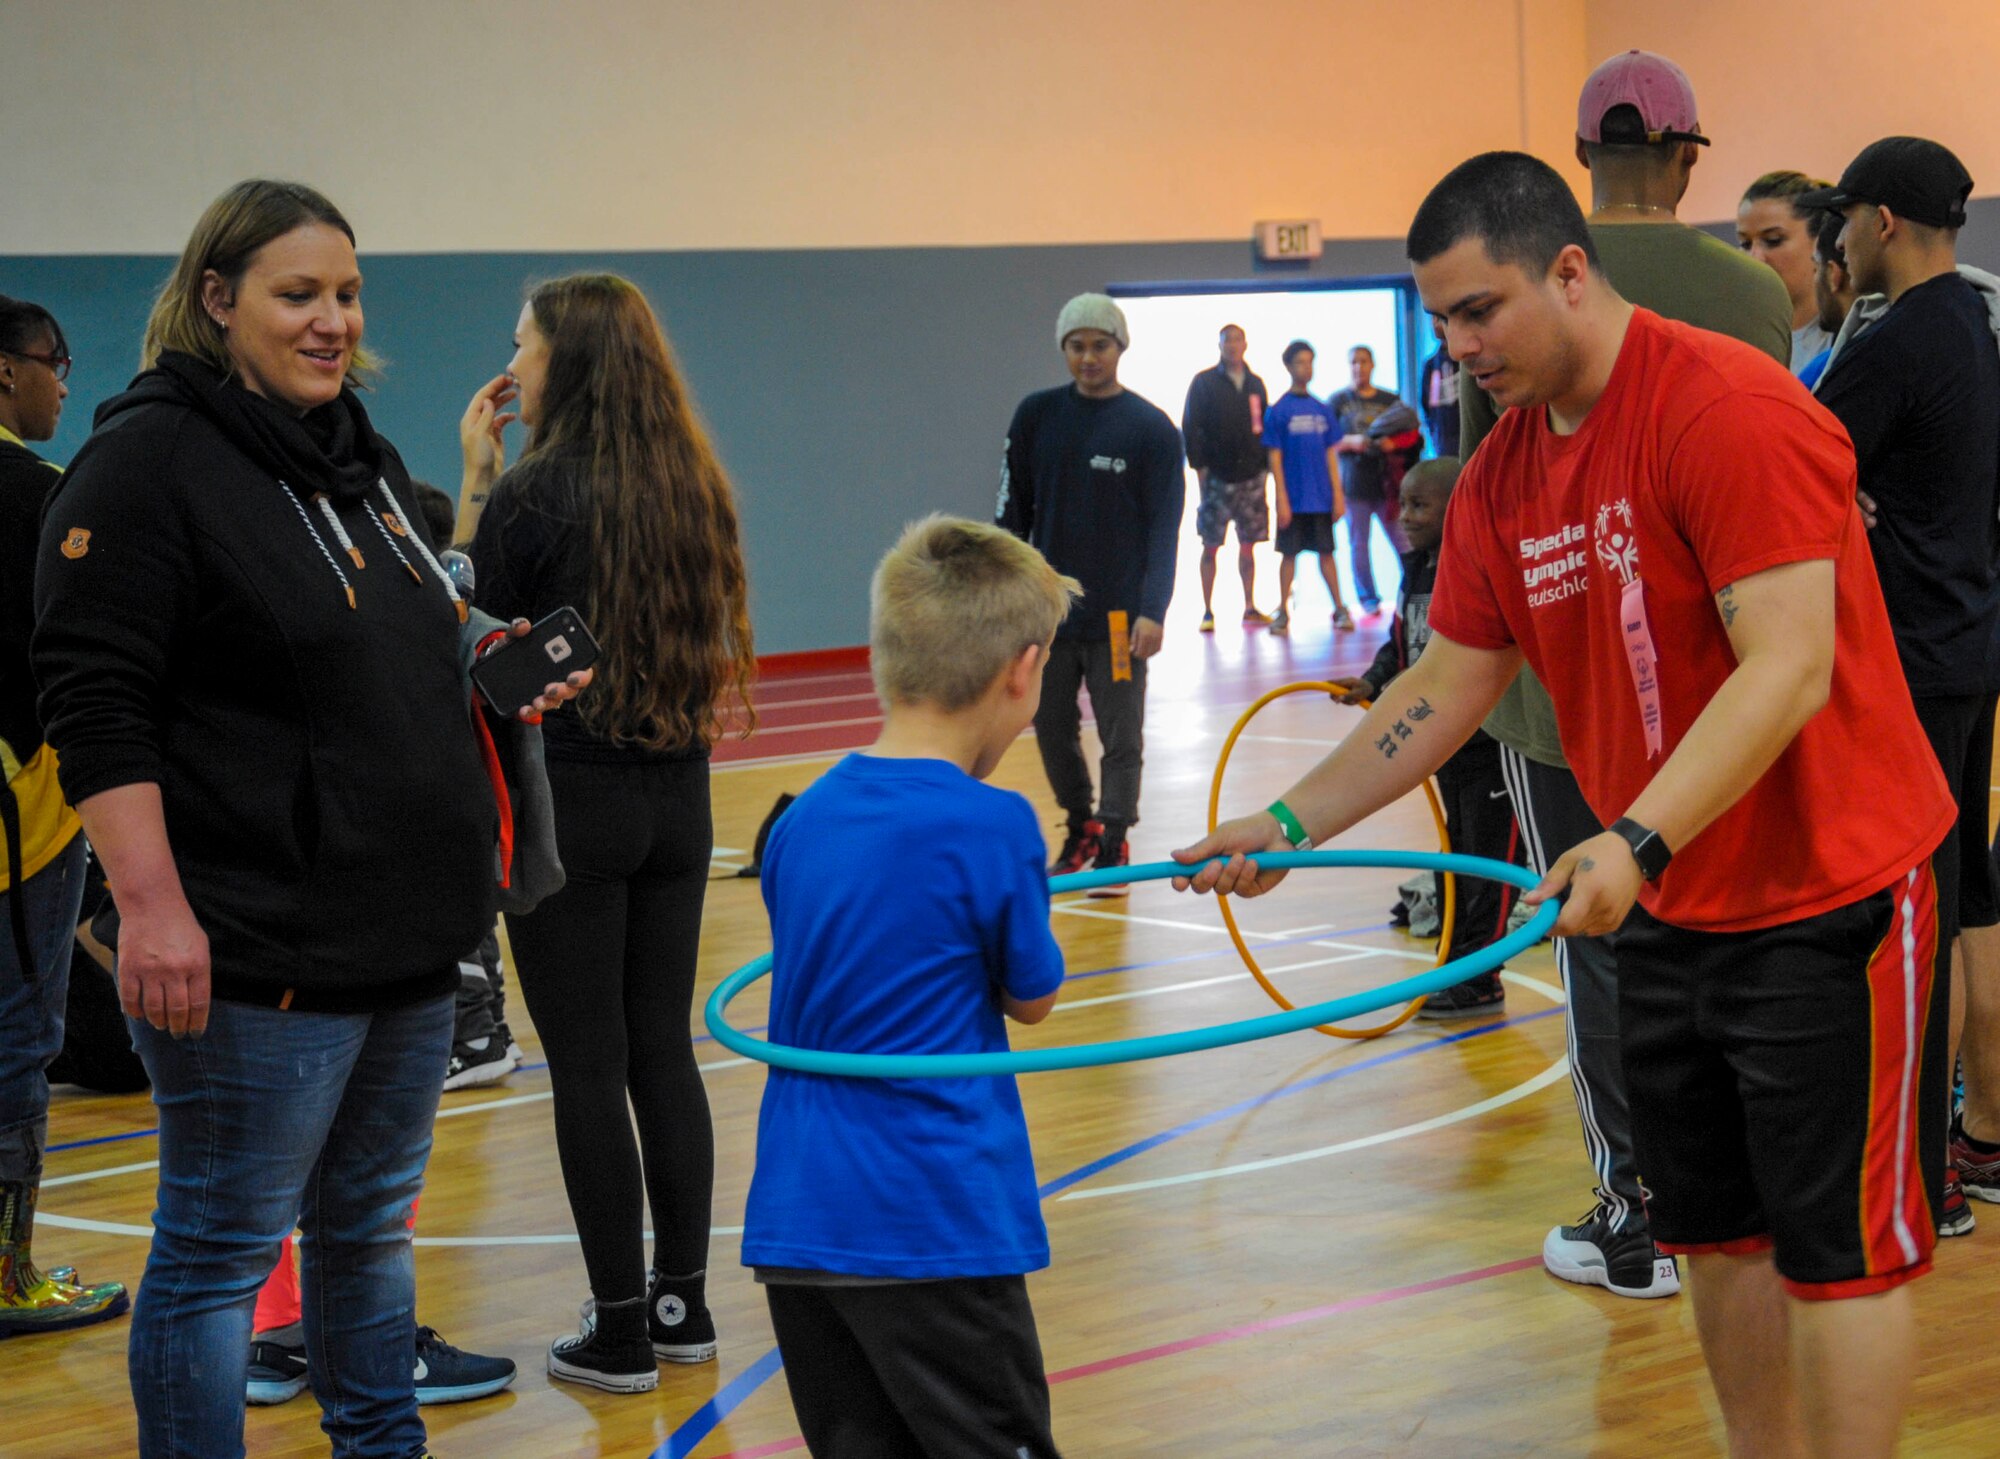 U.S. Air Force Tech. Sgt. Jonathan Garrett, 86th Vehicle Readiness Squadron resource advisor, helps Kai, a special Olympian, practice for the hula hoop event on Ramstein Air Base, Germany, May 19, 2017. The hula hoop event was just one of several competitions held during the 2017 Spring Kaiserslautern Military Community Special Olympics. More than 70 students competed in events including hula hoop, tug-of-war, basketball skills, volleyball, and more throughout the day. (U.S. Air Force photo by Staff Sgt. Timothy Moore)